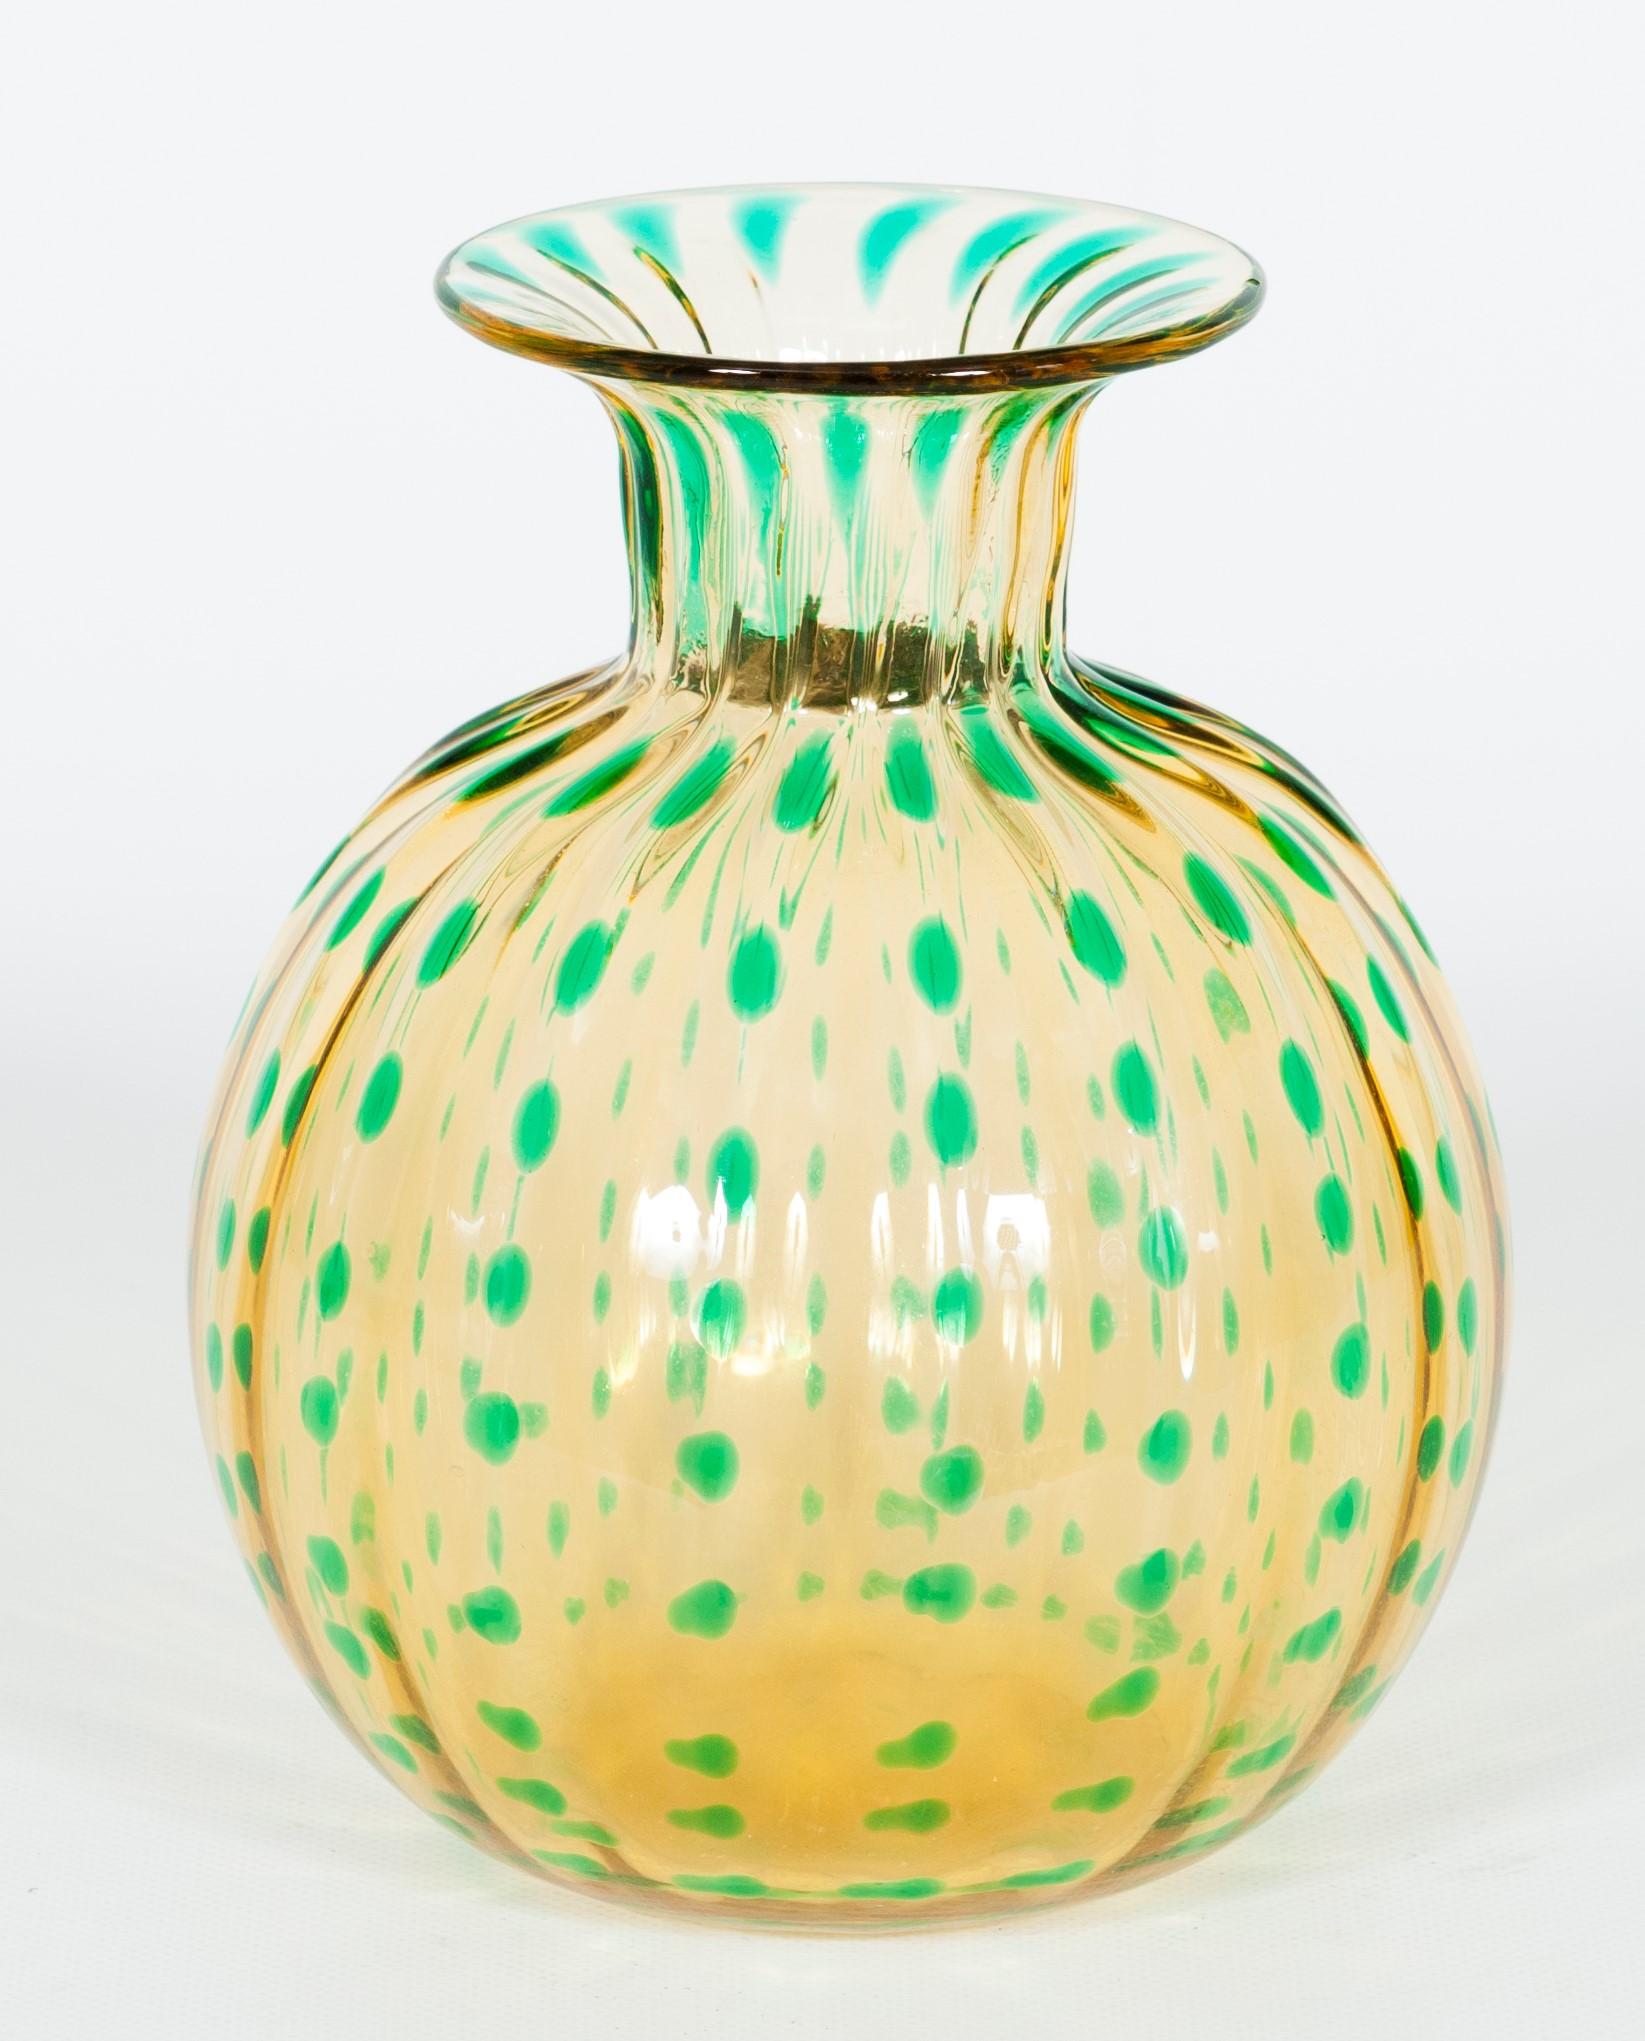 20th century Murano glass round vase with green flecks, Attributed to Caramea.
This beautiful amber color vase was entirely made in the island of Murano in the 1990s, and it is attributed to the renowned Italian maestro Carlo Tosi, also known as